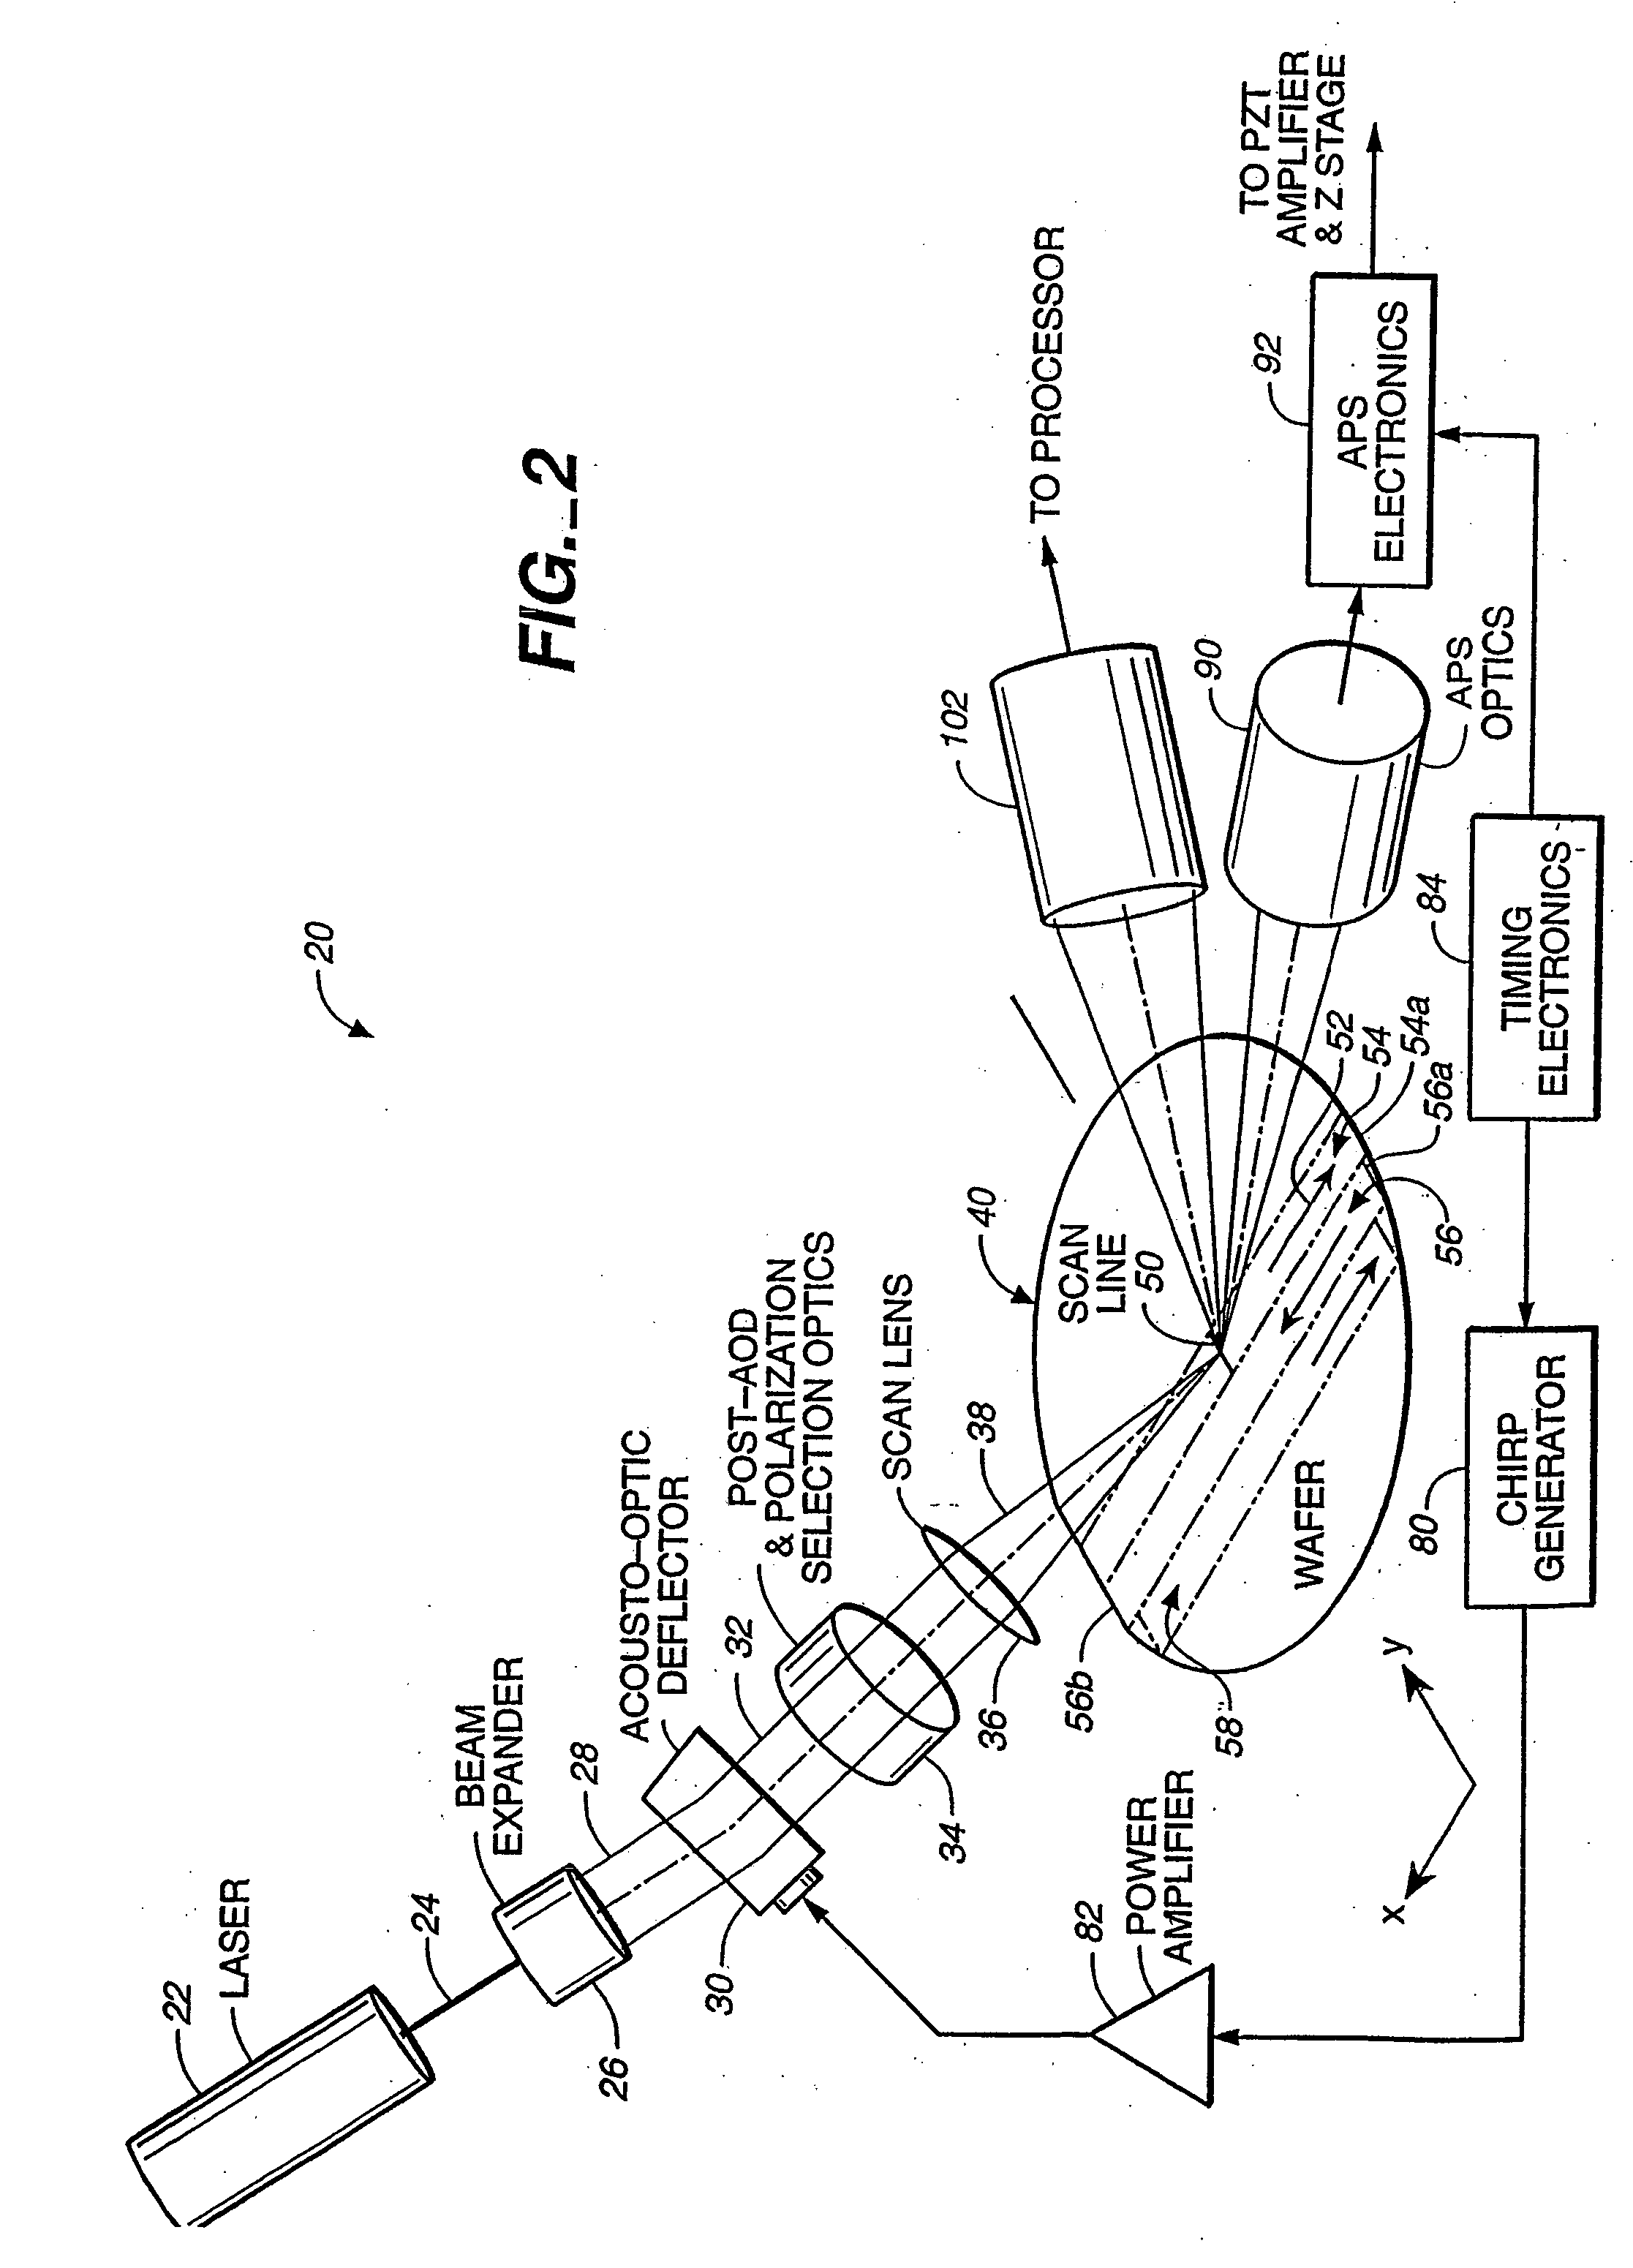 Scanning system for inspecting anamolies on surfaces